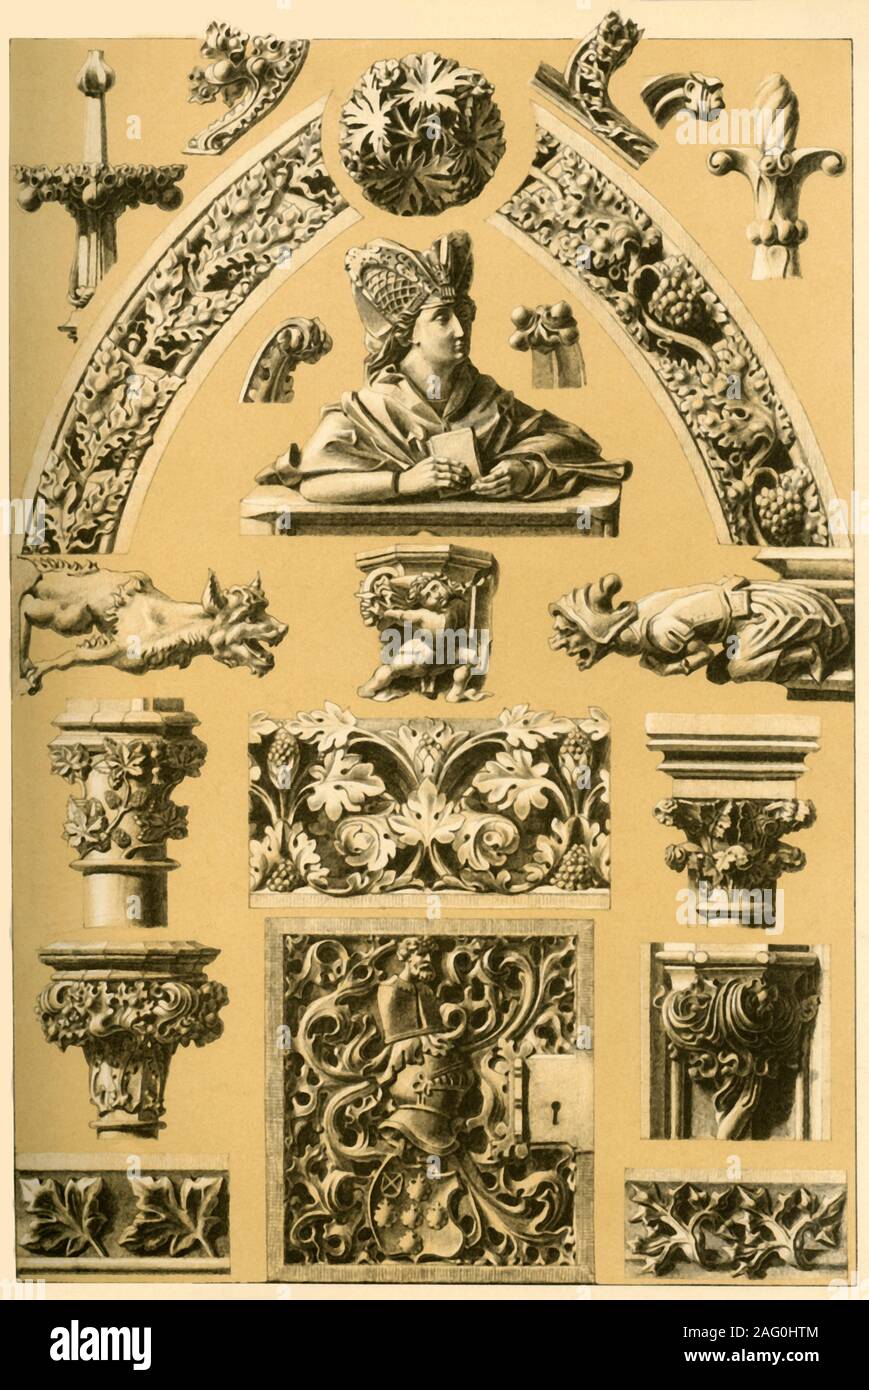 Medieval architectural ornament and sculpture, (1898). 'Fig 1: Carved figure from the stalls of the Minster at Ulm. Fig 2: Projecting bracket of a seat-flap (Misericordia) of the same stalls. Fig 3: Key-stone-decoration from the cathedral at Naumburg. Fig 4: Projecting bracket of a capital from the church at Gelnhausen. Fig 5: Projecting bracket of a capital of French origin. Fig 6: Finial from Notre-dame at Paris. Fig 7: Knob of a finial ibid. Fig 8: Finial from the tabernacle of the former hospital-church at Esslingen. Fig 9: Crocket from Nuremberg. Fig 10: Crocket from Cologne Cathedral. Fi Stock Photo